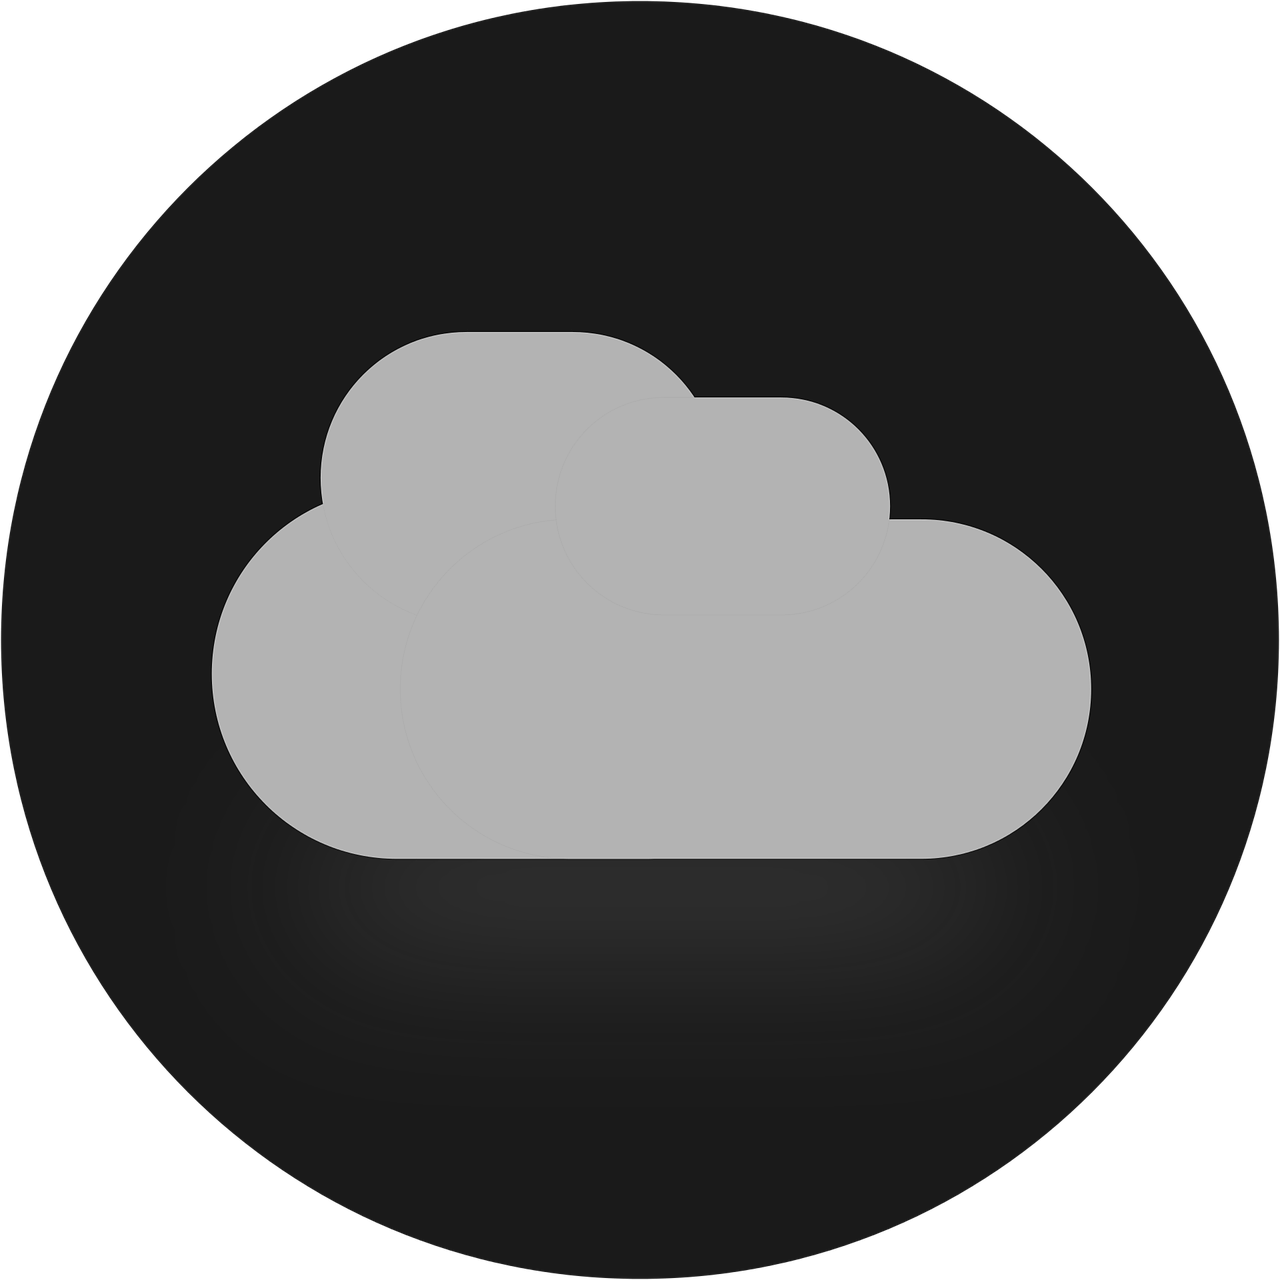 File:Weather-overcast.svg - Wikimedia Commons